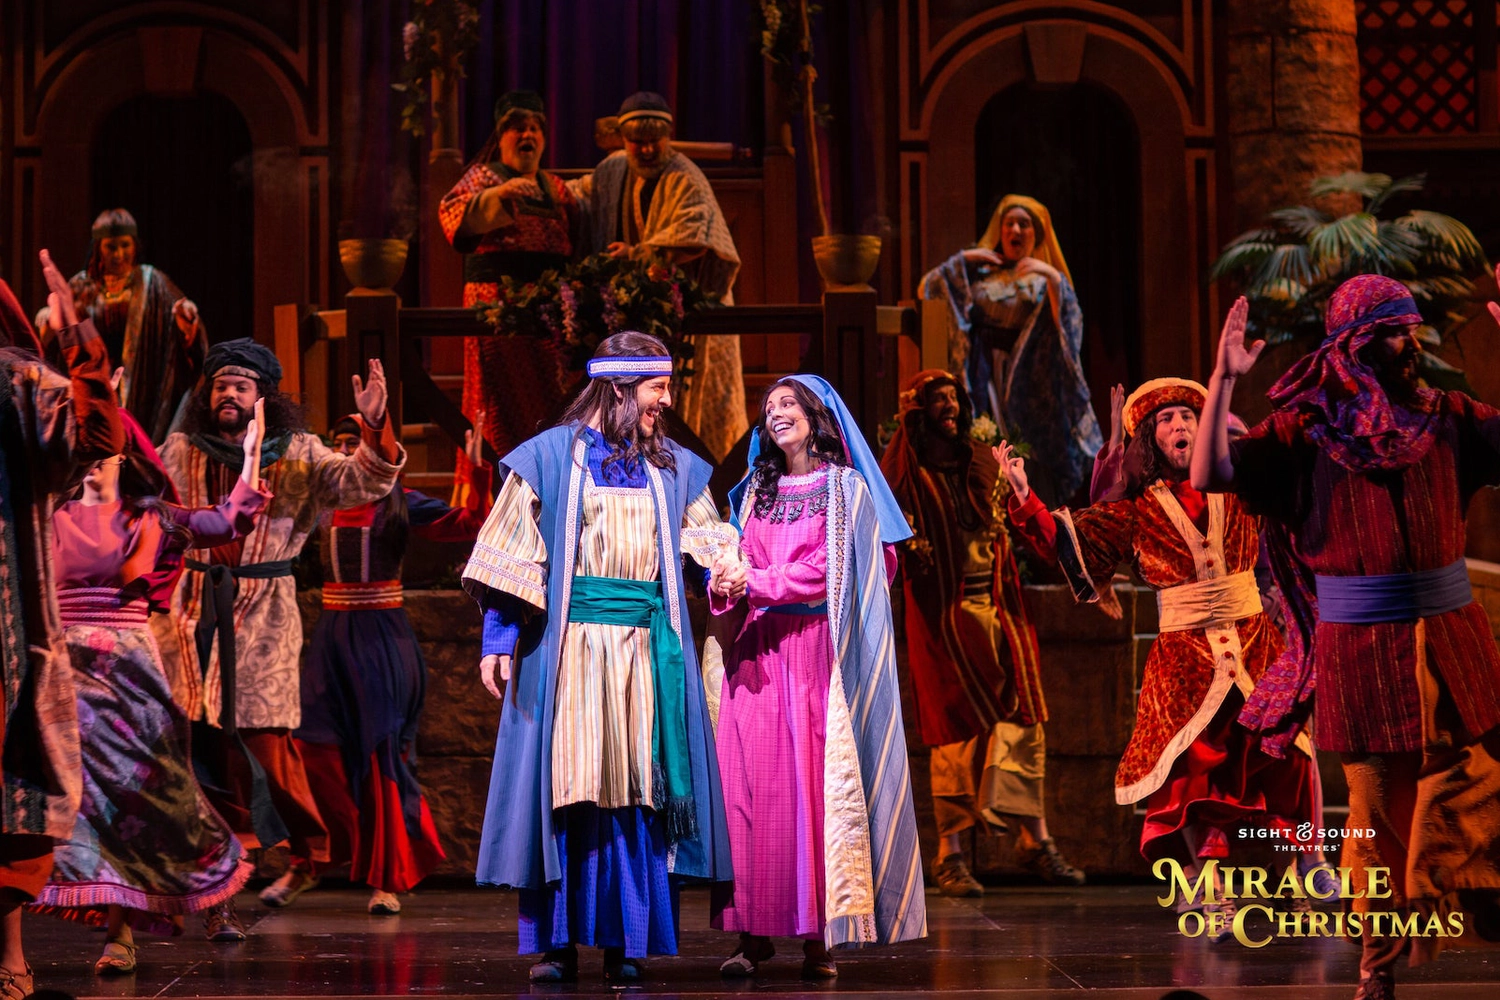 Actors performing a religious play at the Sight & Sound Theatre in Branson, MO.